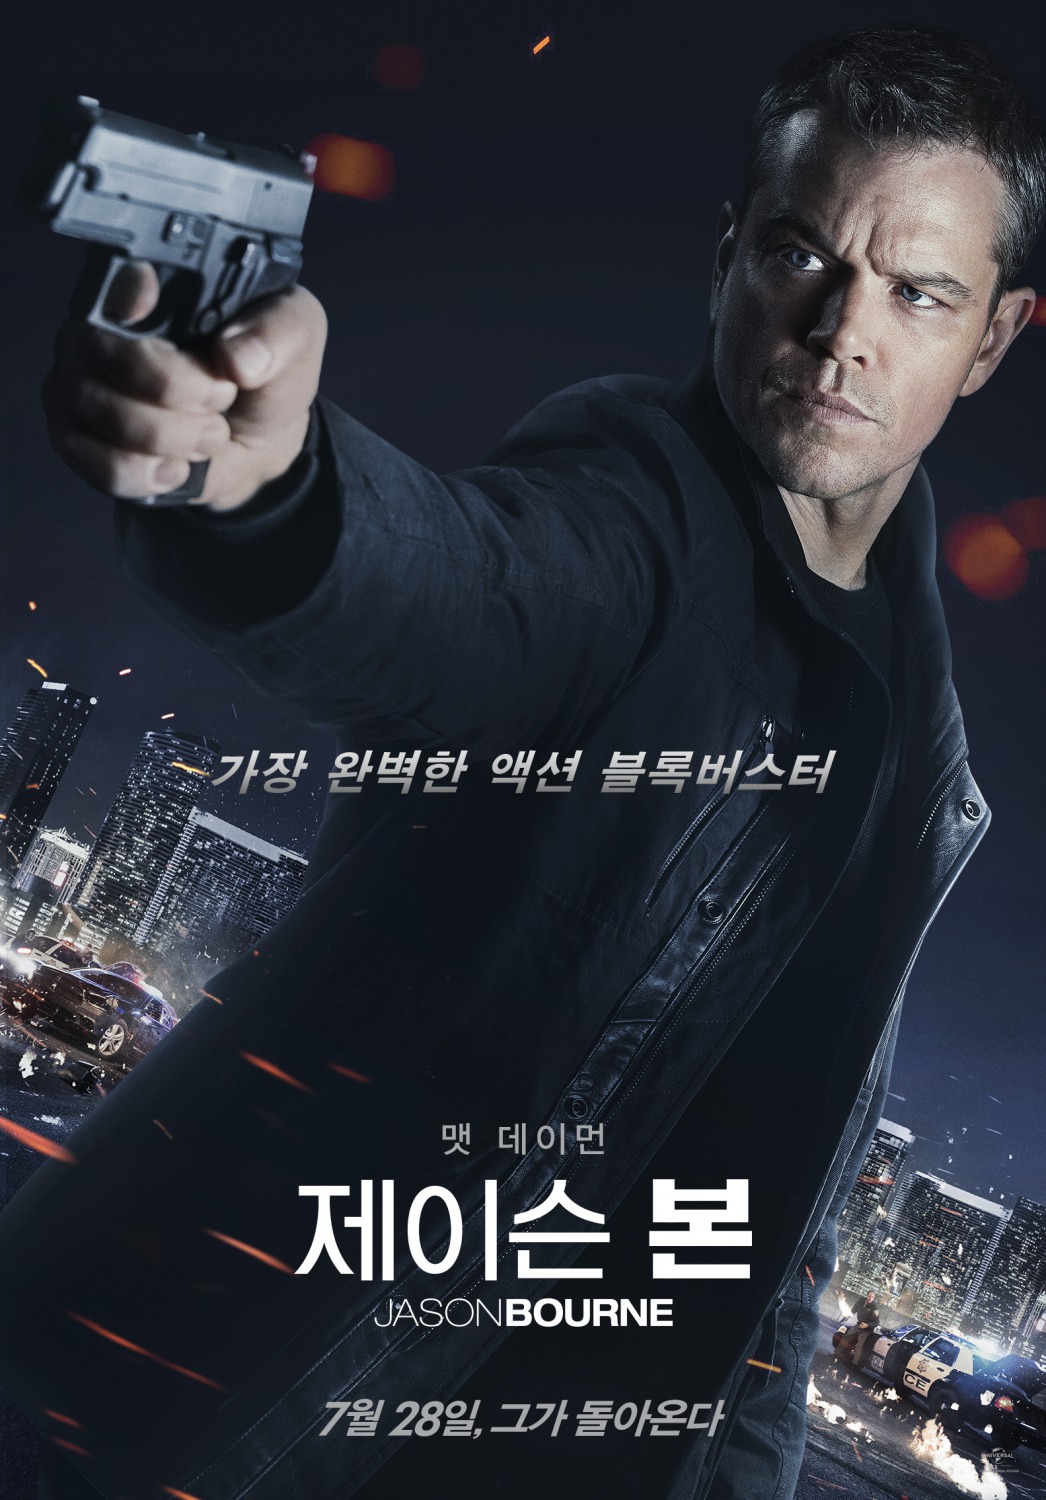 Extra Large Movie Poster Image for Jason Bourne (#5 of 6)